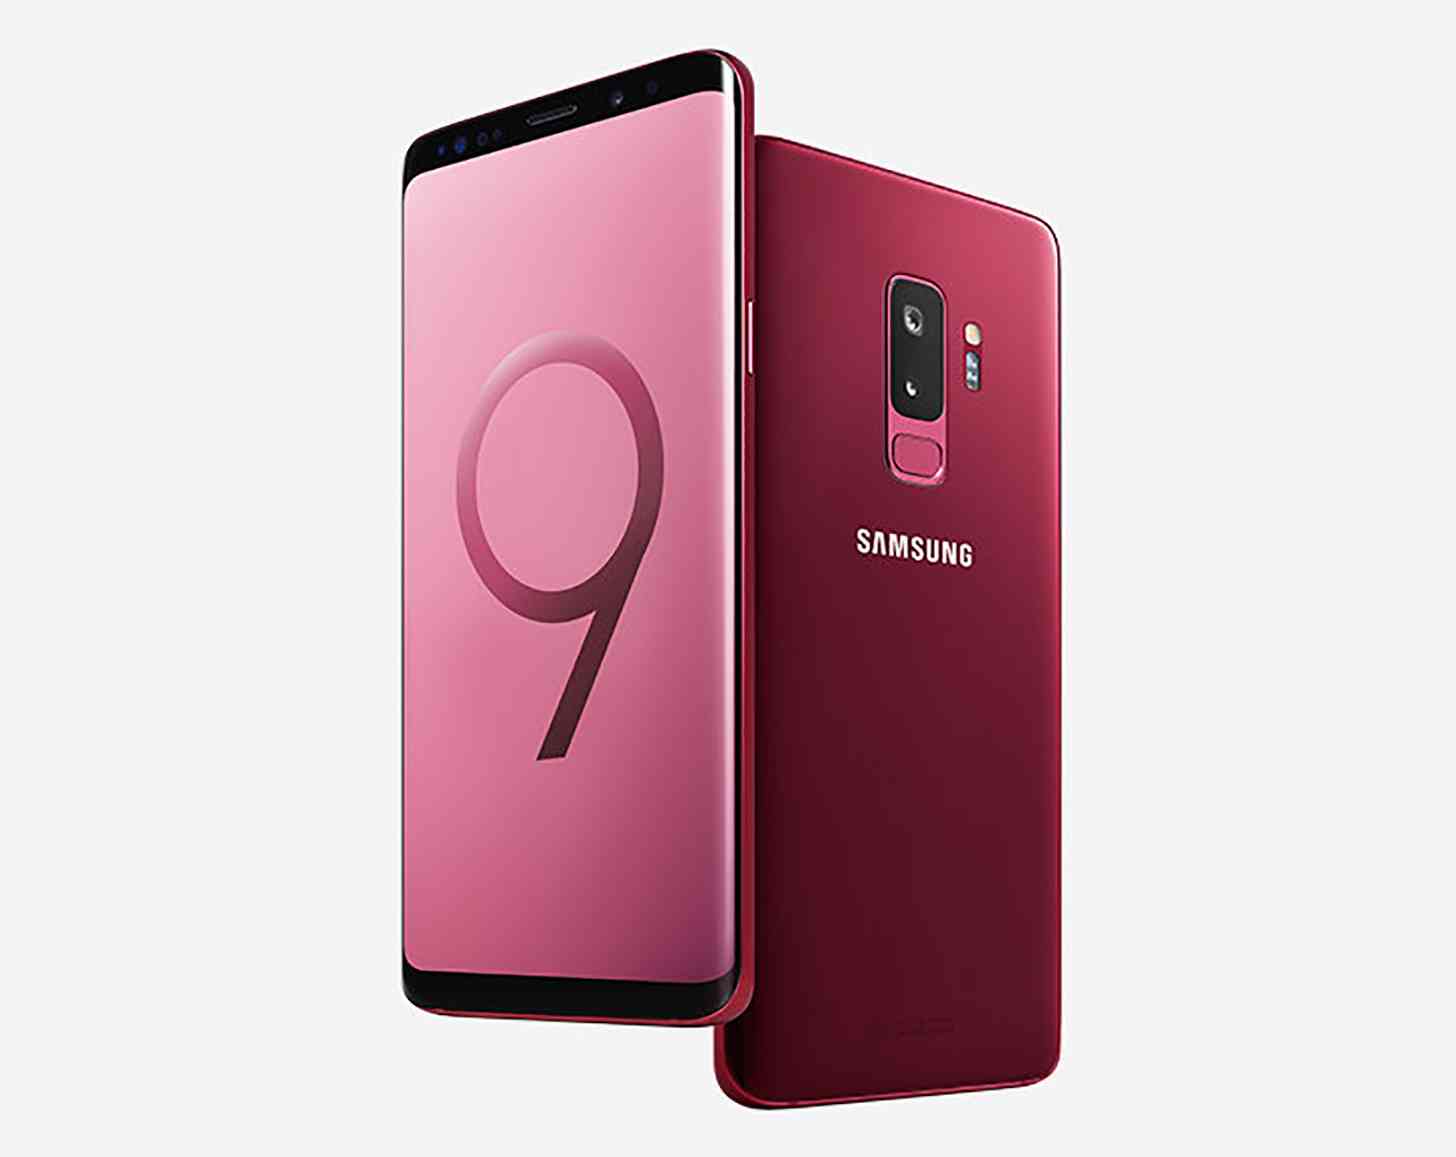 Samsung Galaxy S9 Burgundy Red official